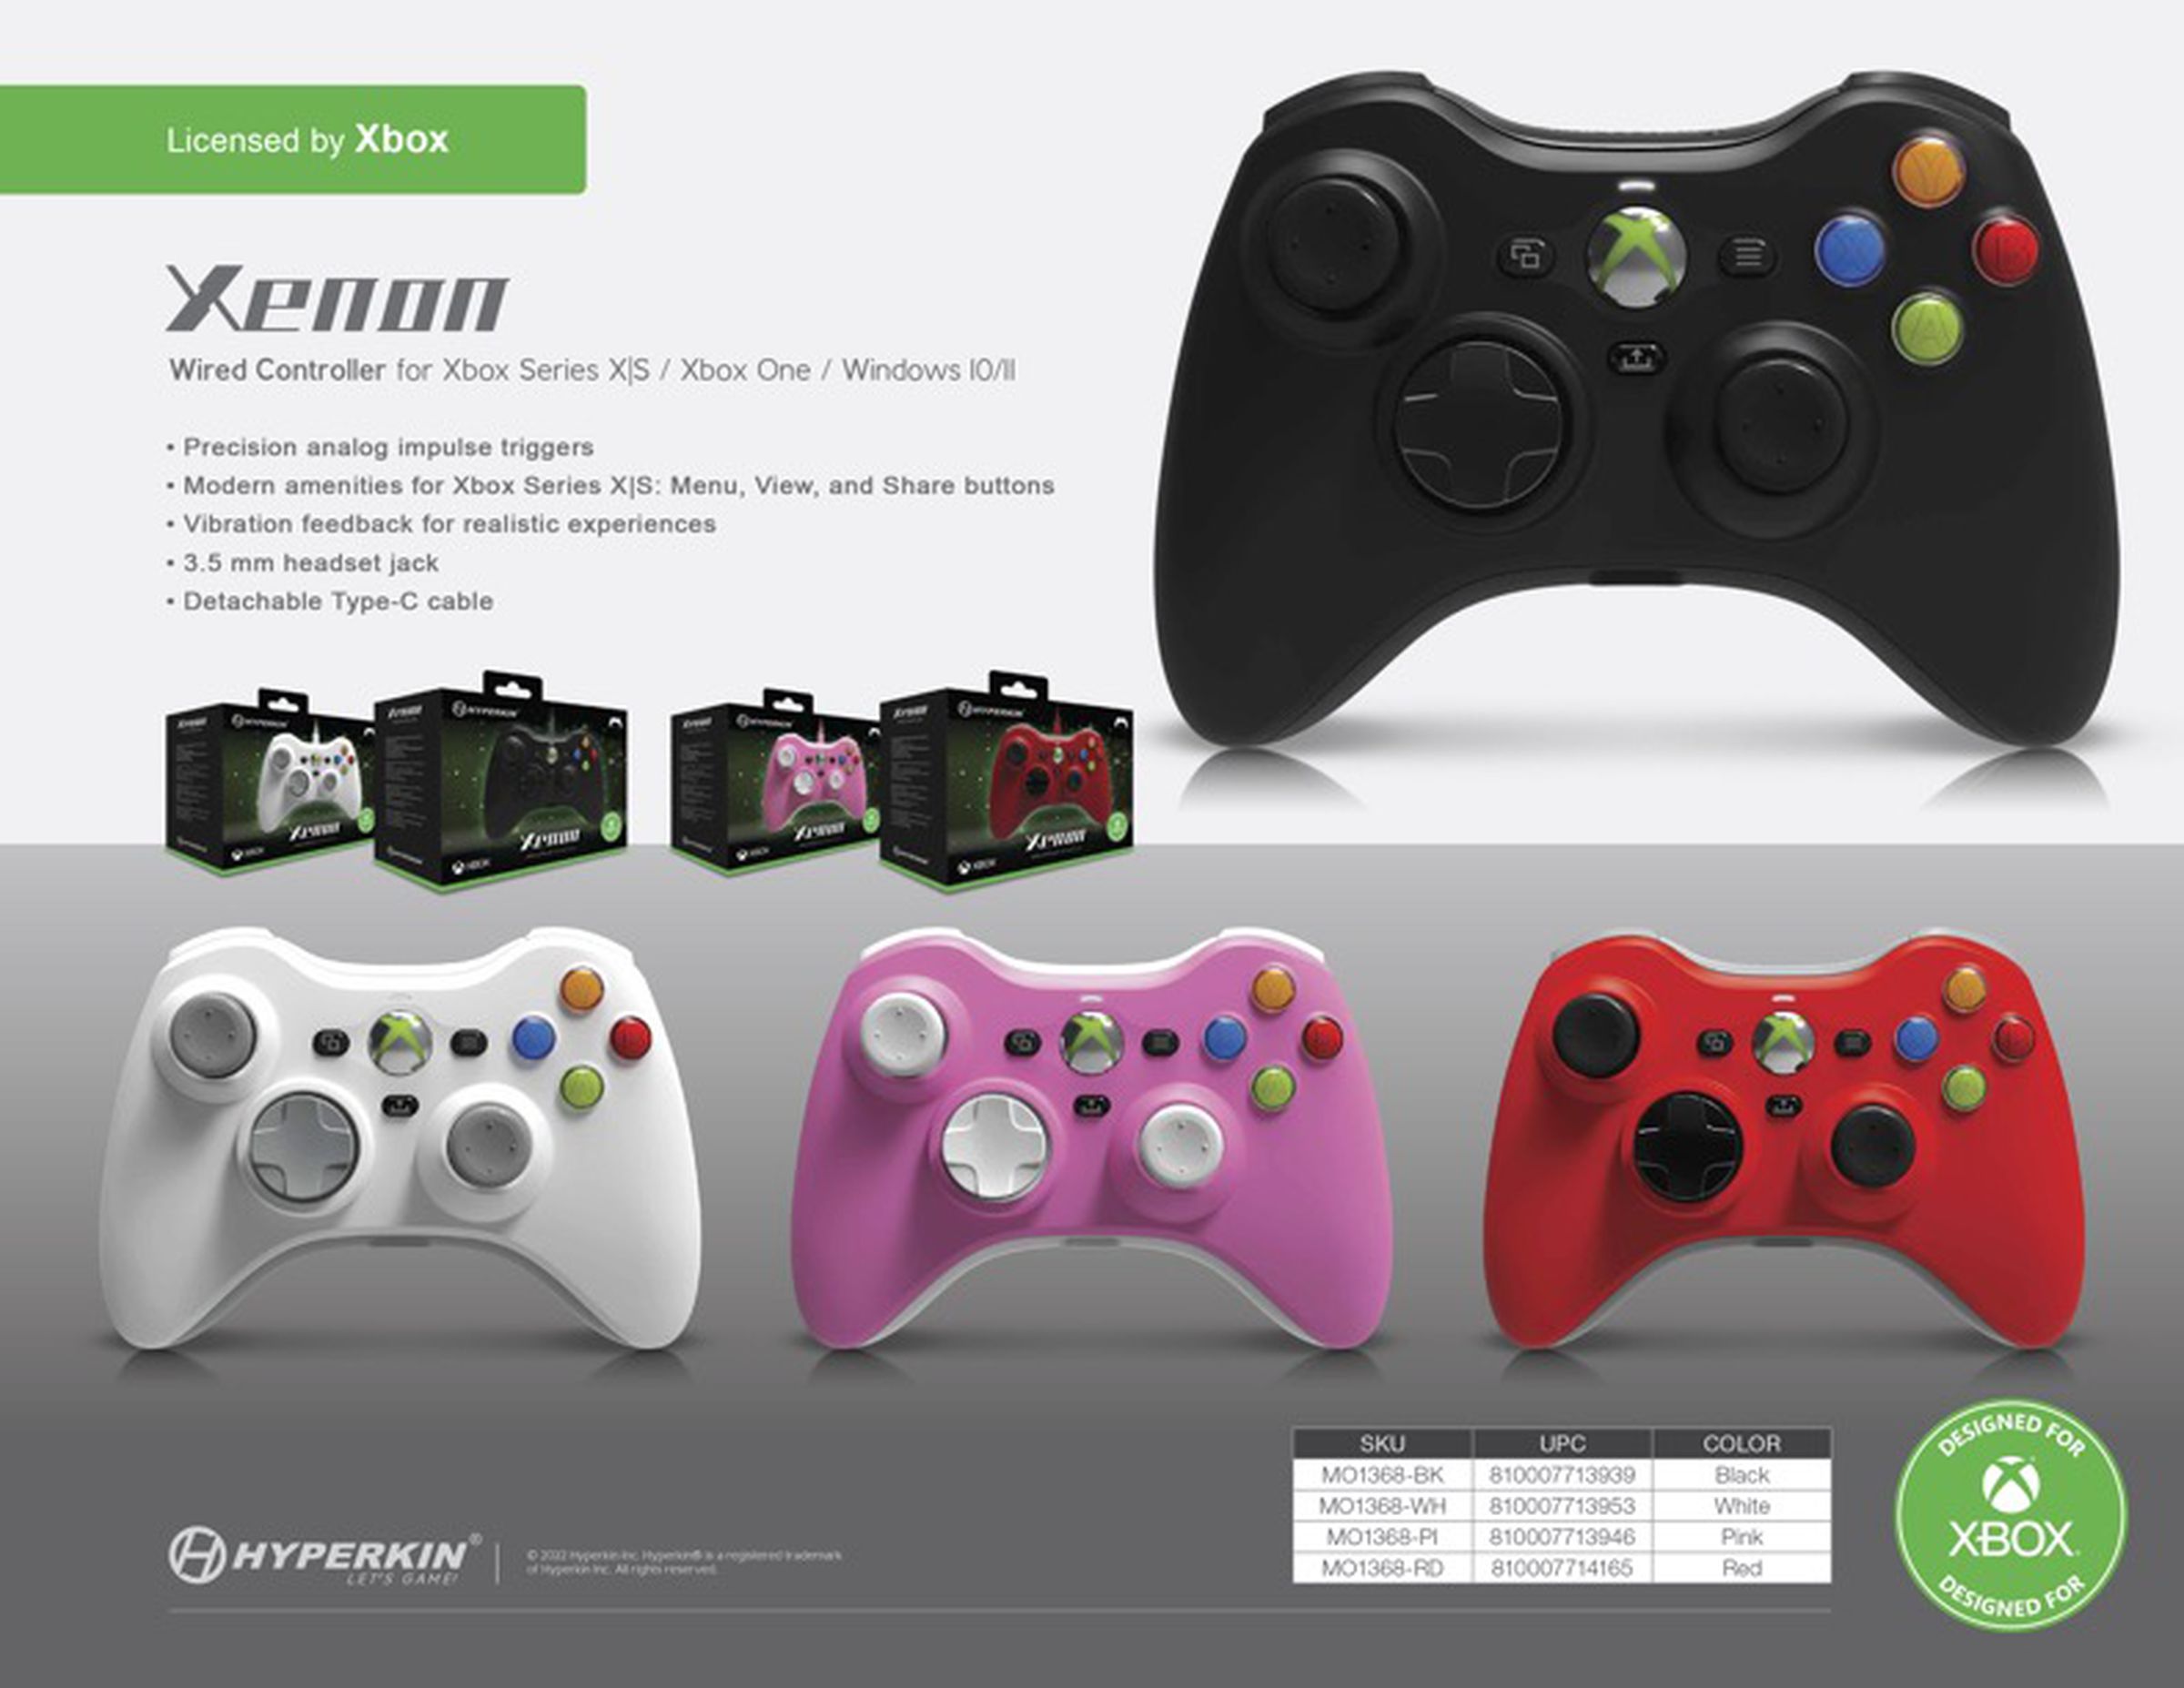 Early product info and colors for the Hyperkin Xenon. Xbox 360 Controller